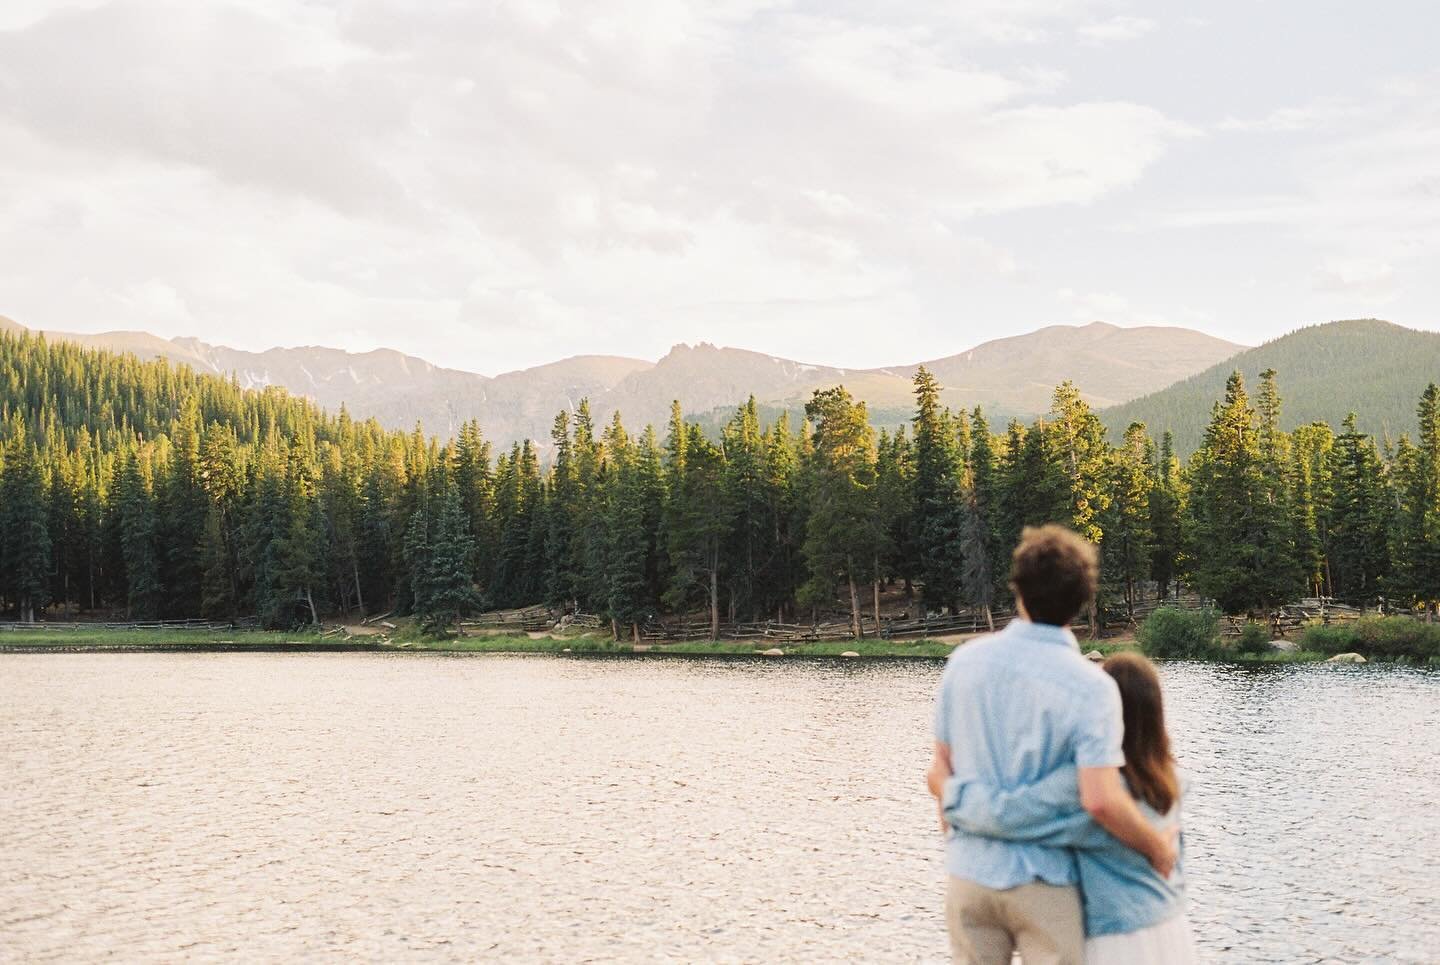 My last post was a sunrise-scape, so here&rsquo;s a sunset! Ashley &amp; Nik&rsquo;s beautiful summer Colorado elopement at Echo Lake, photographed entirely on film. 

🏷️
#Coloradoelopementphotographer #coloradoelopement #elopementphotographer #micr